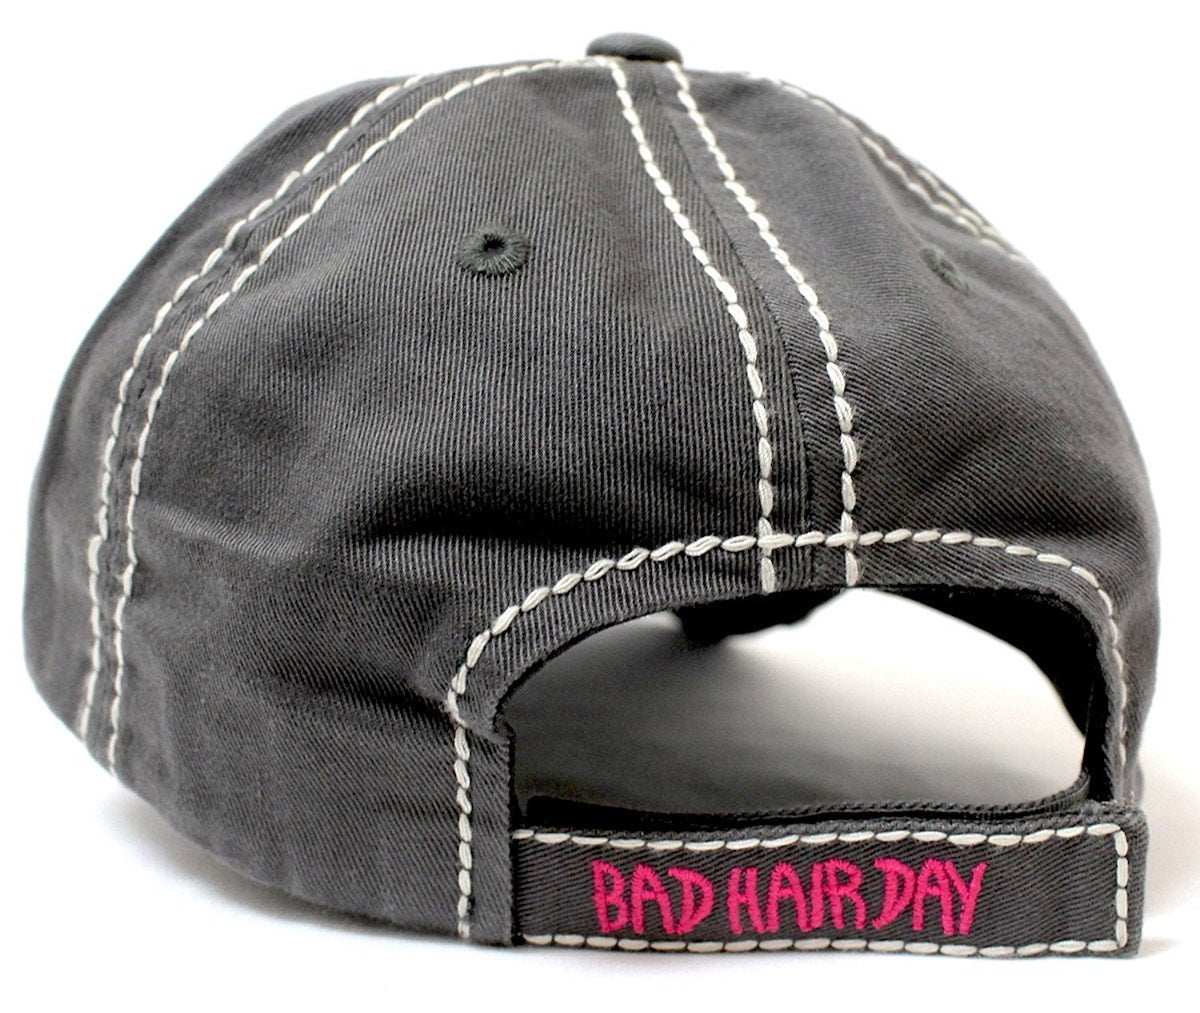 NEW COLOR!! Washed D.GREY "BAD HAIR DAY" Embroidery Baseball Hat - Caps 'N Vintage 